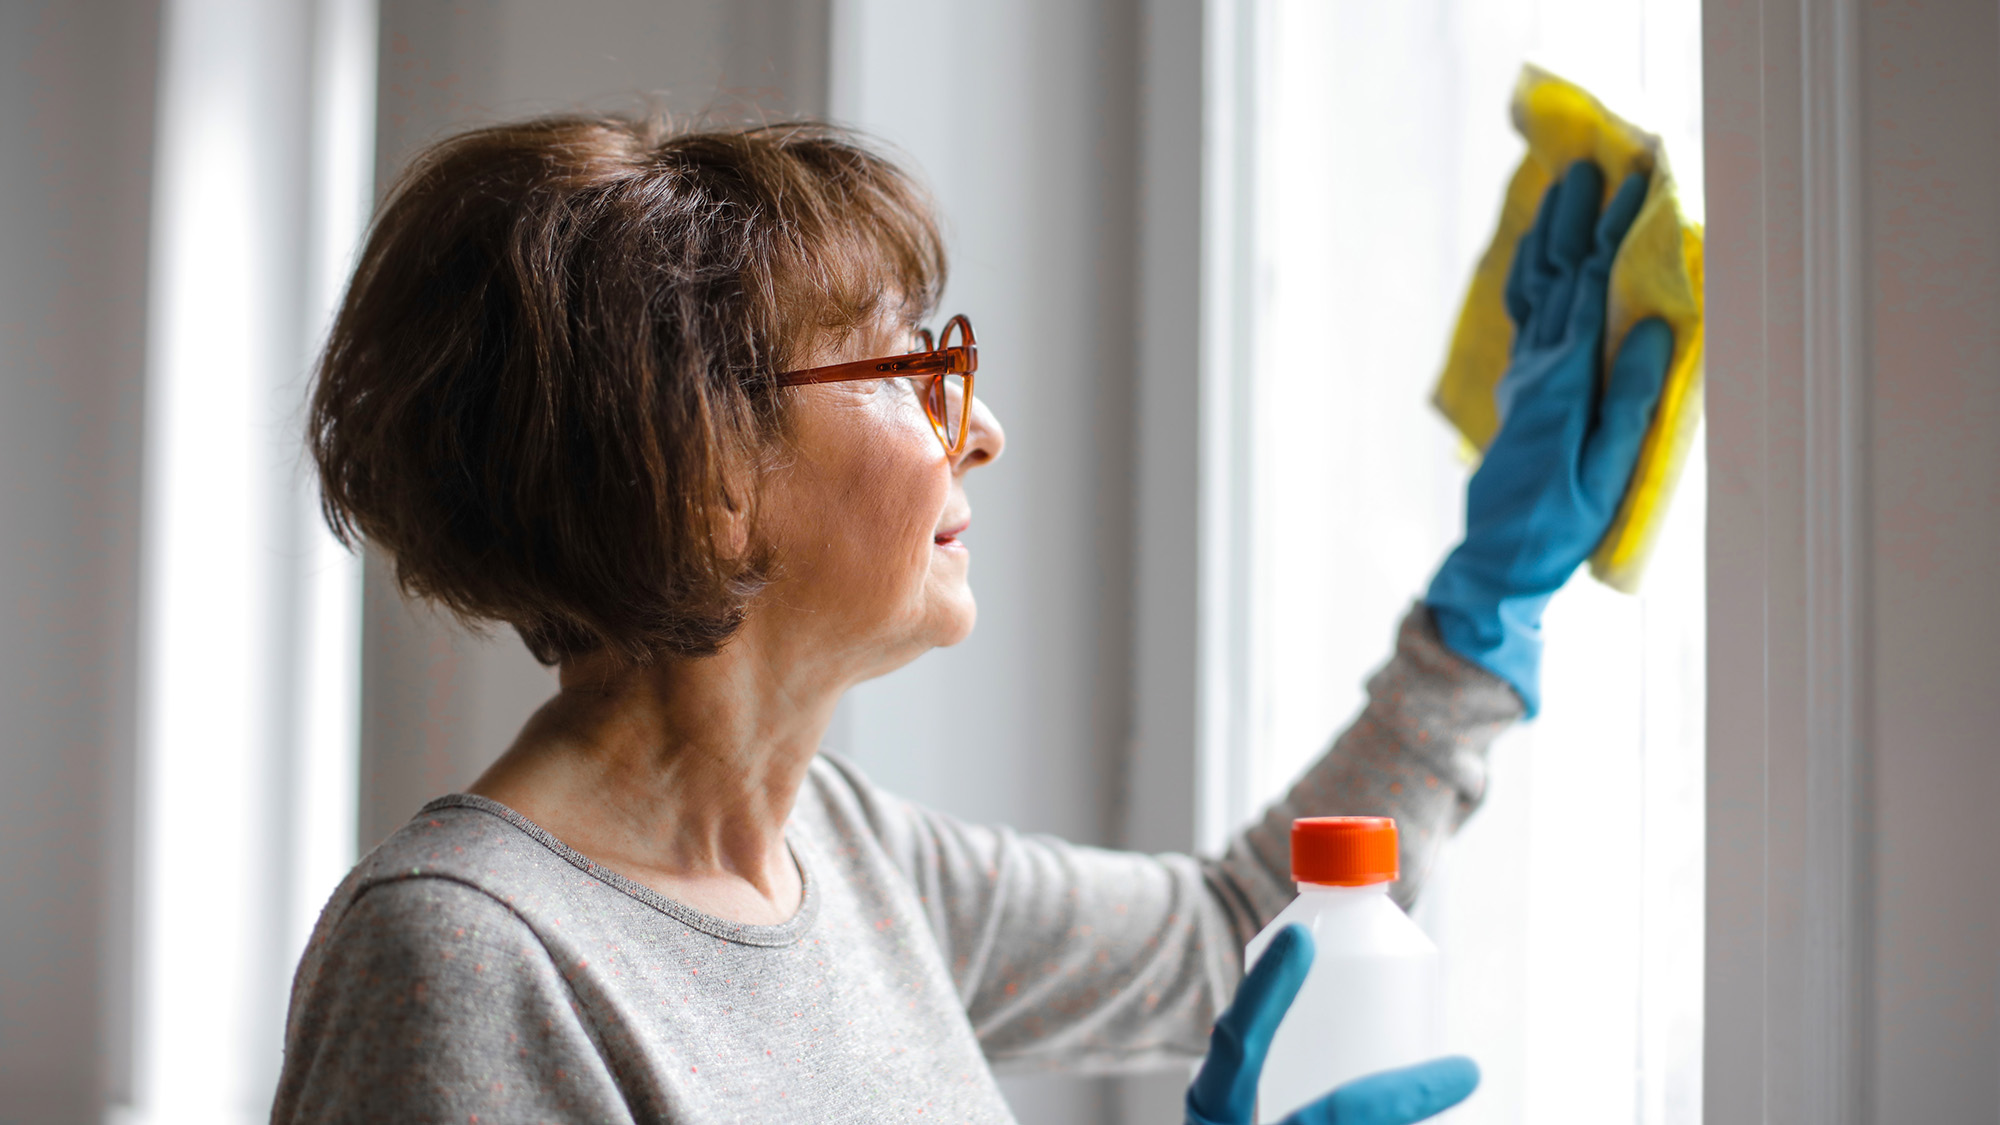 An older person with short brown hair wearing blue rubber gloves and cleaning a window with a yellow rag.